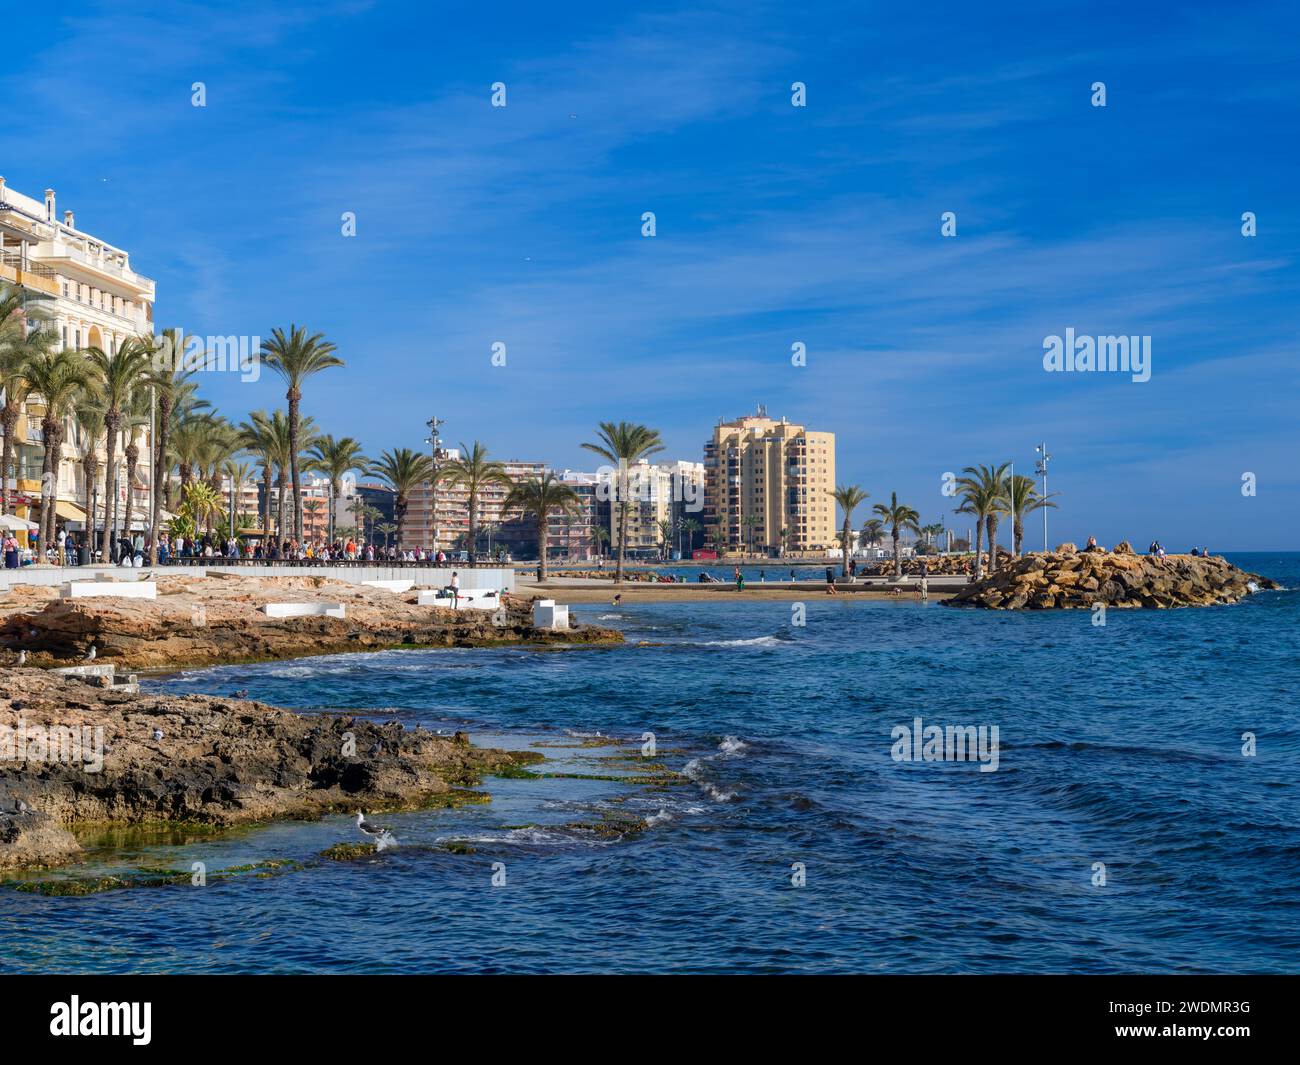 Torrevieja, Alicante, Spain. A beautiful day in mid january on the seafront at Torrevieja as people enjoy a gentle breeze off the Mediterranean sea. Stock Photo